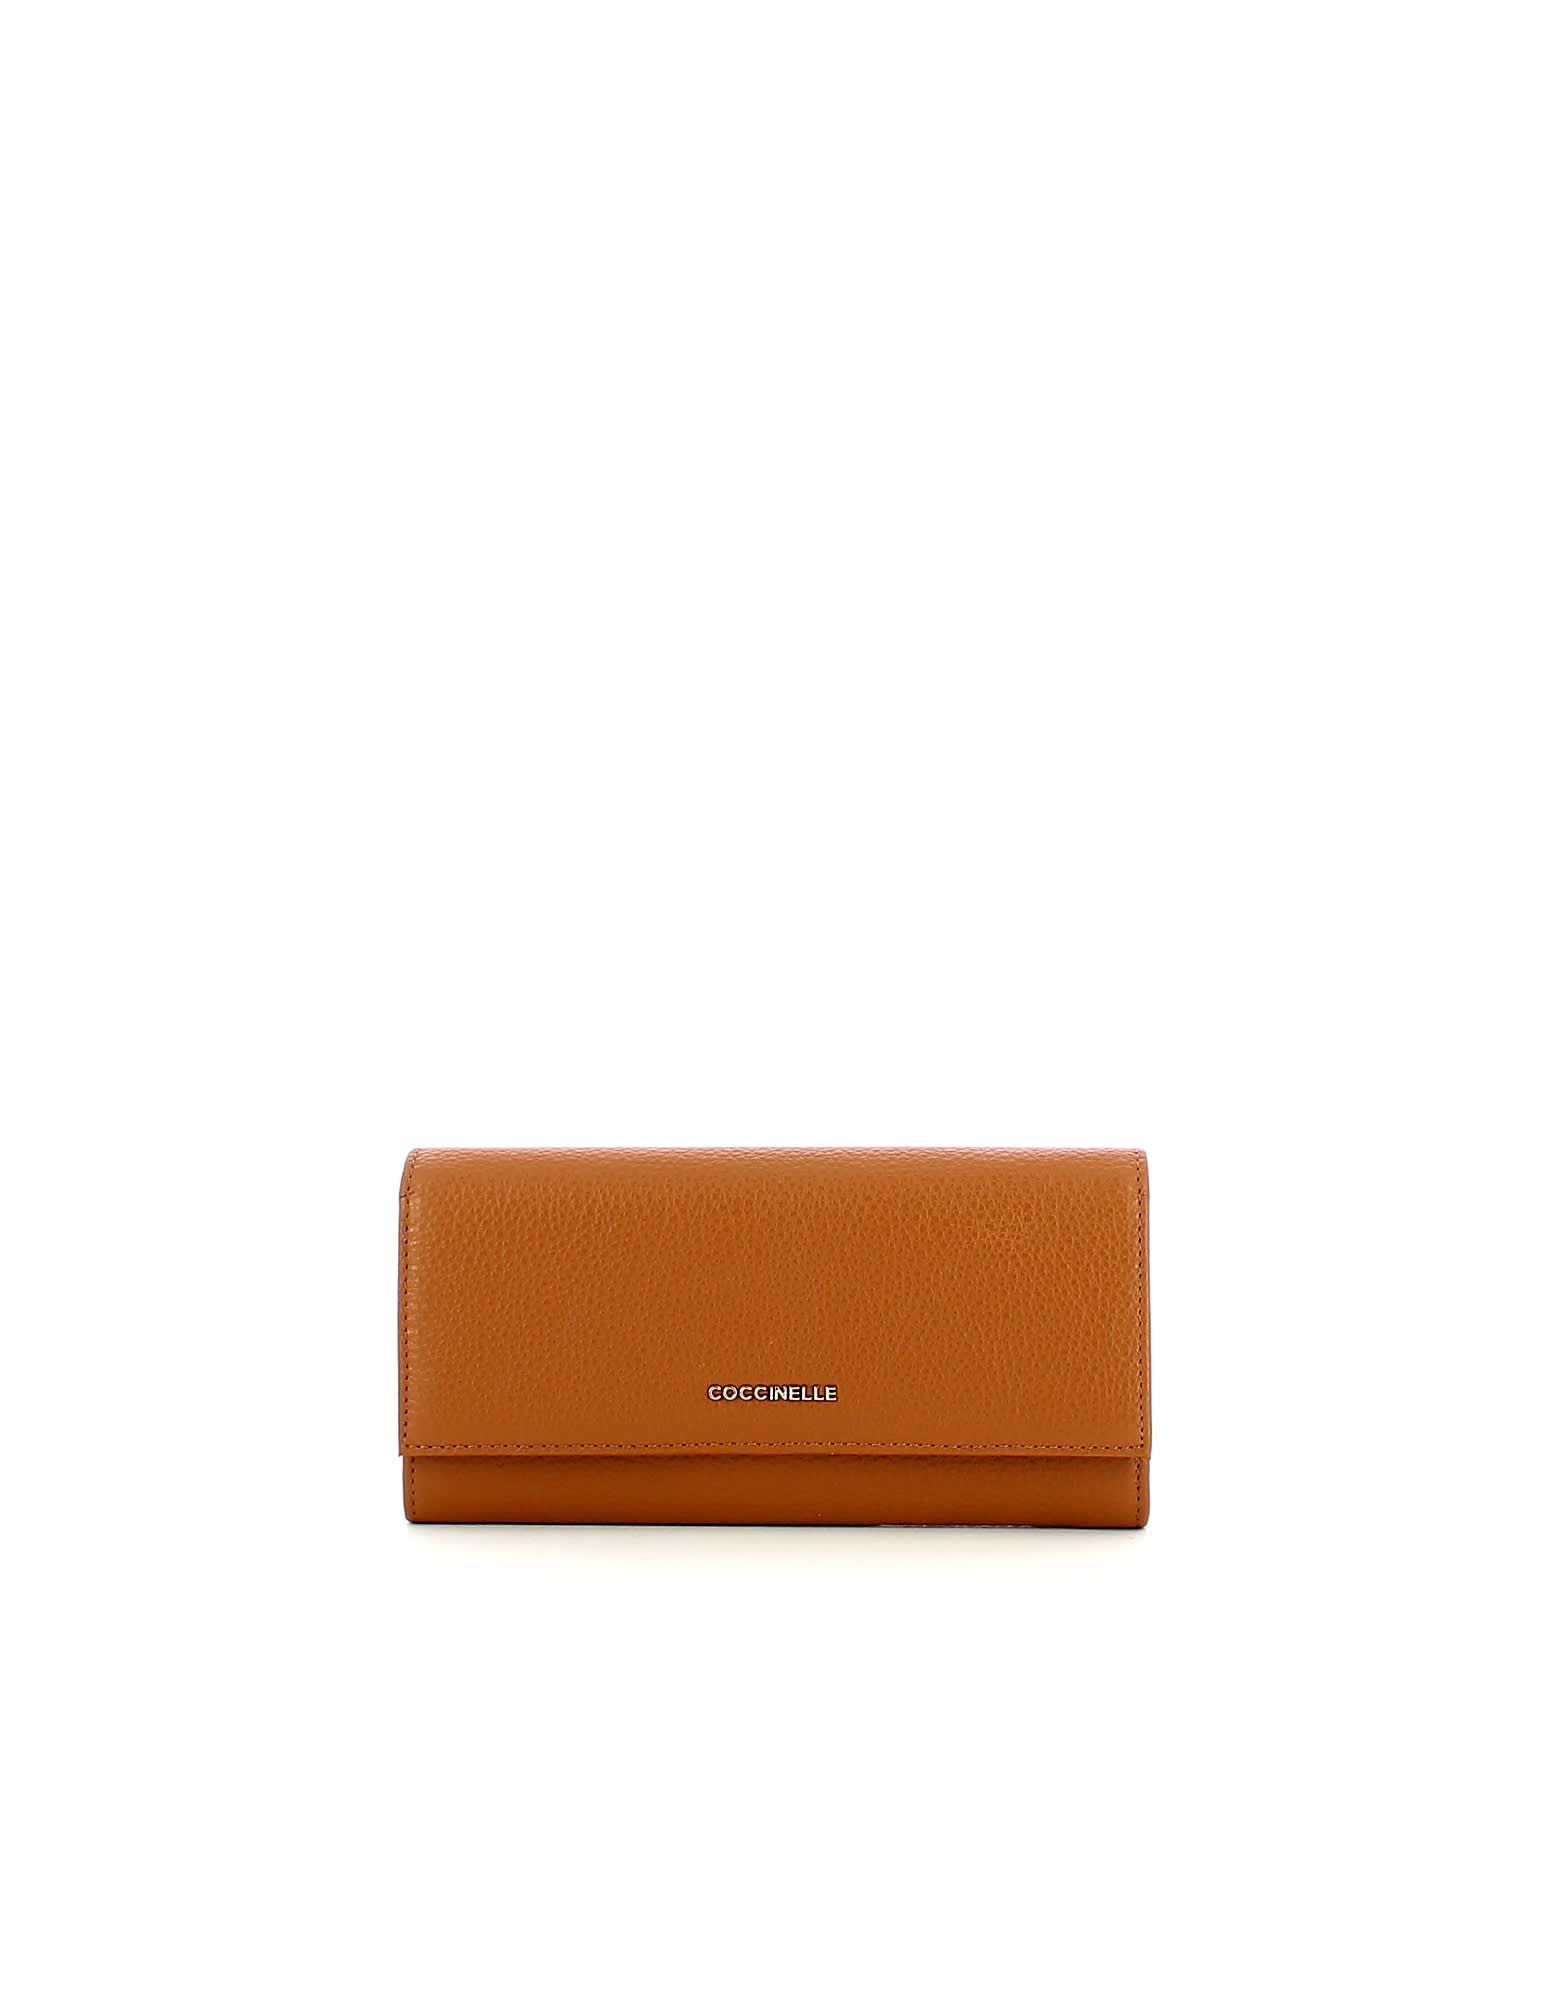 Coccinelle WOMENS BROWN WALLET